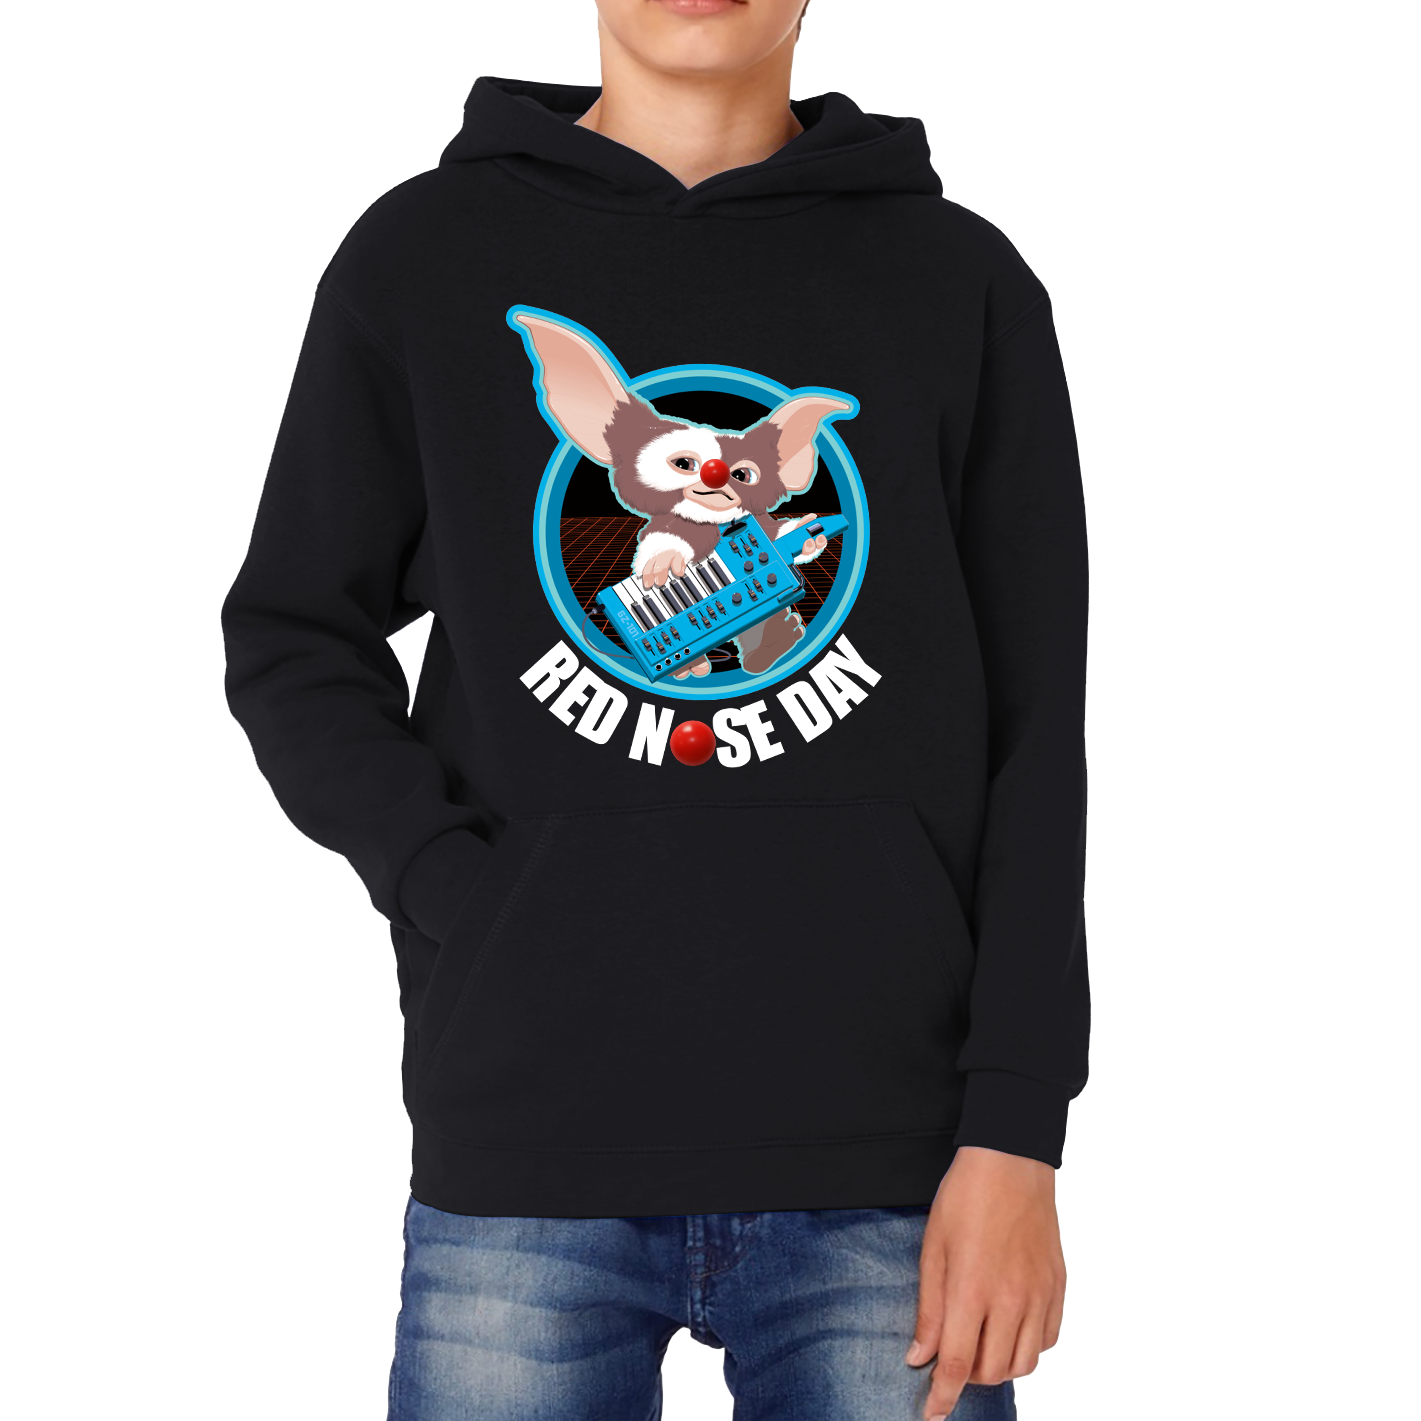 Gremlins Gizmo Piano Red Nose Day Kids Hoodie. 50% Goes To Charity